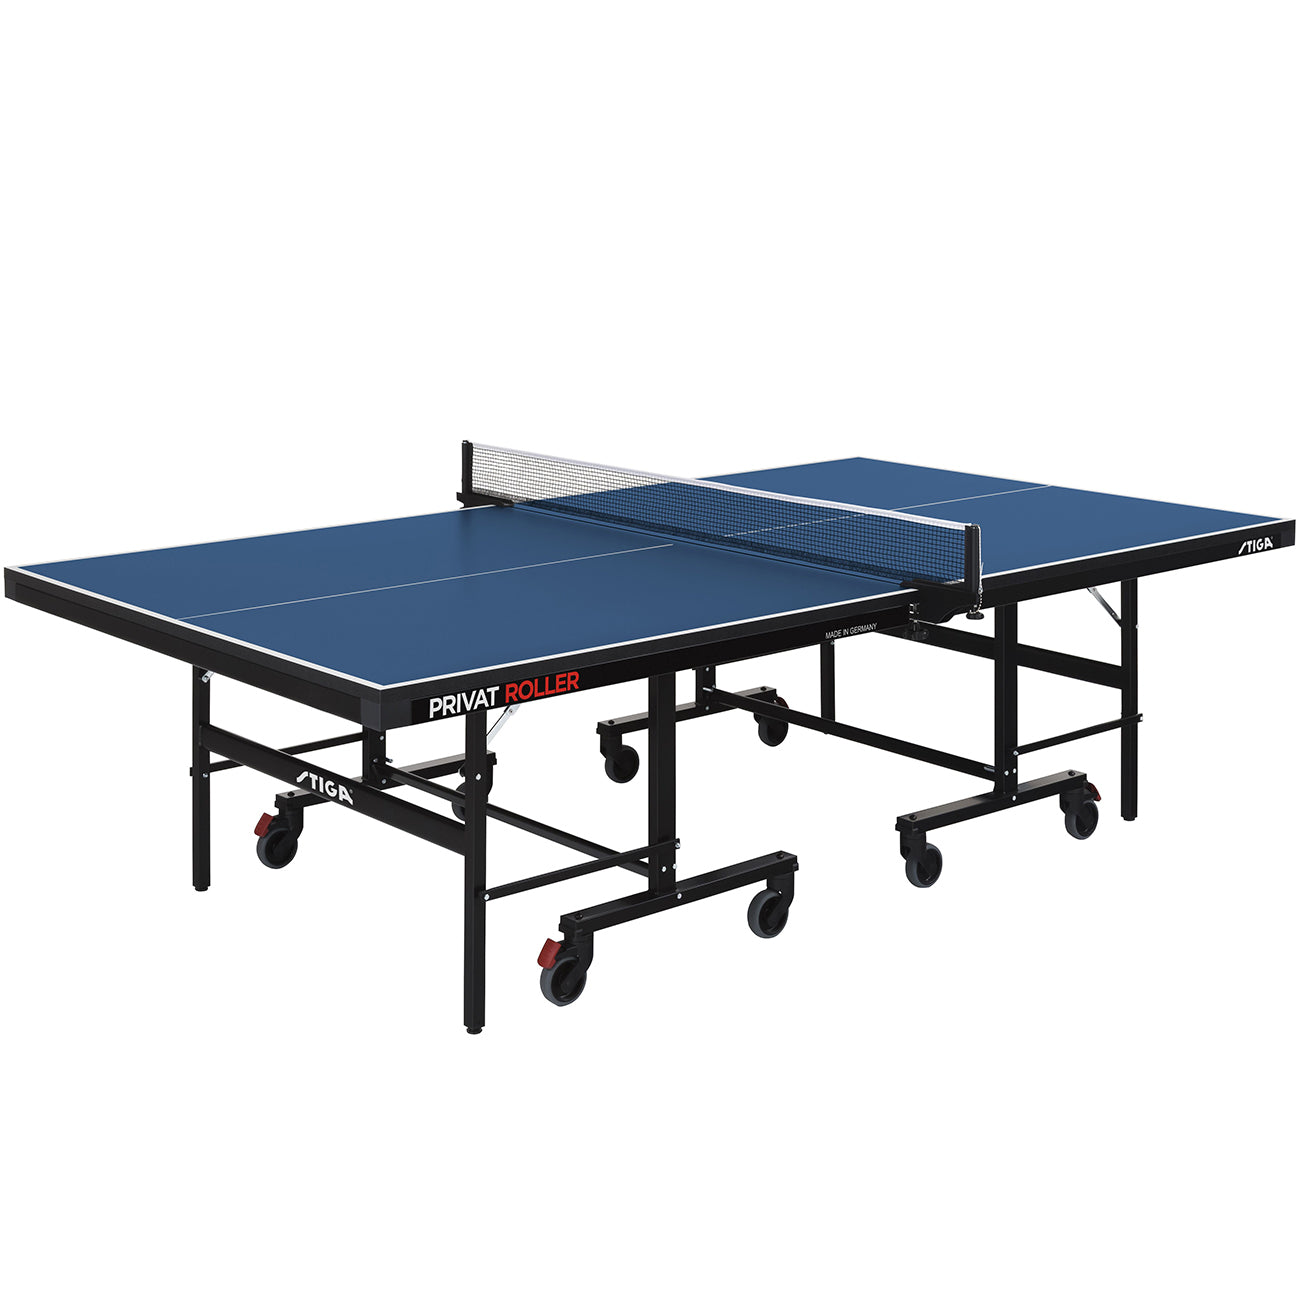 Stiga Privat Roller CSS Indoor Table Tennis Table